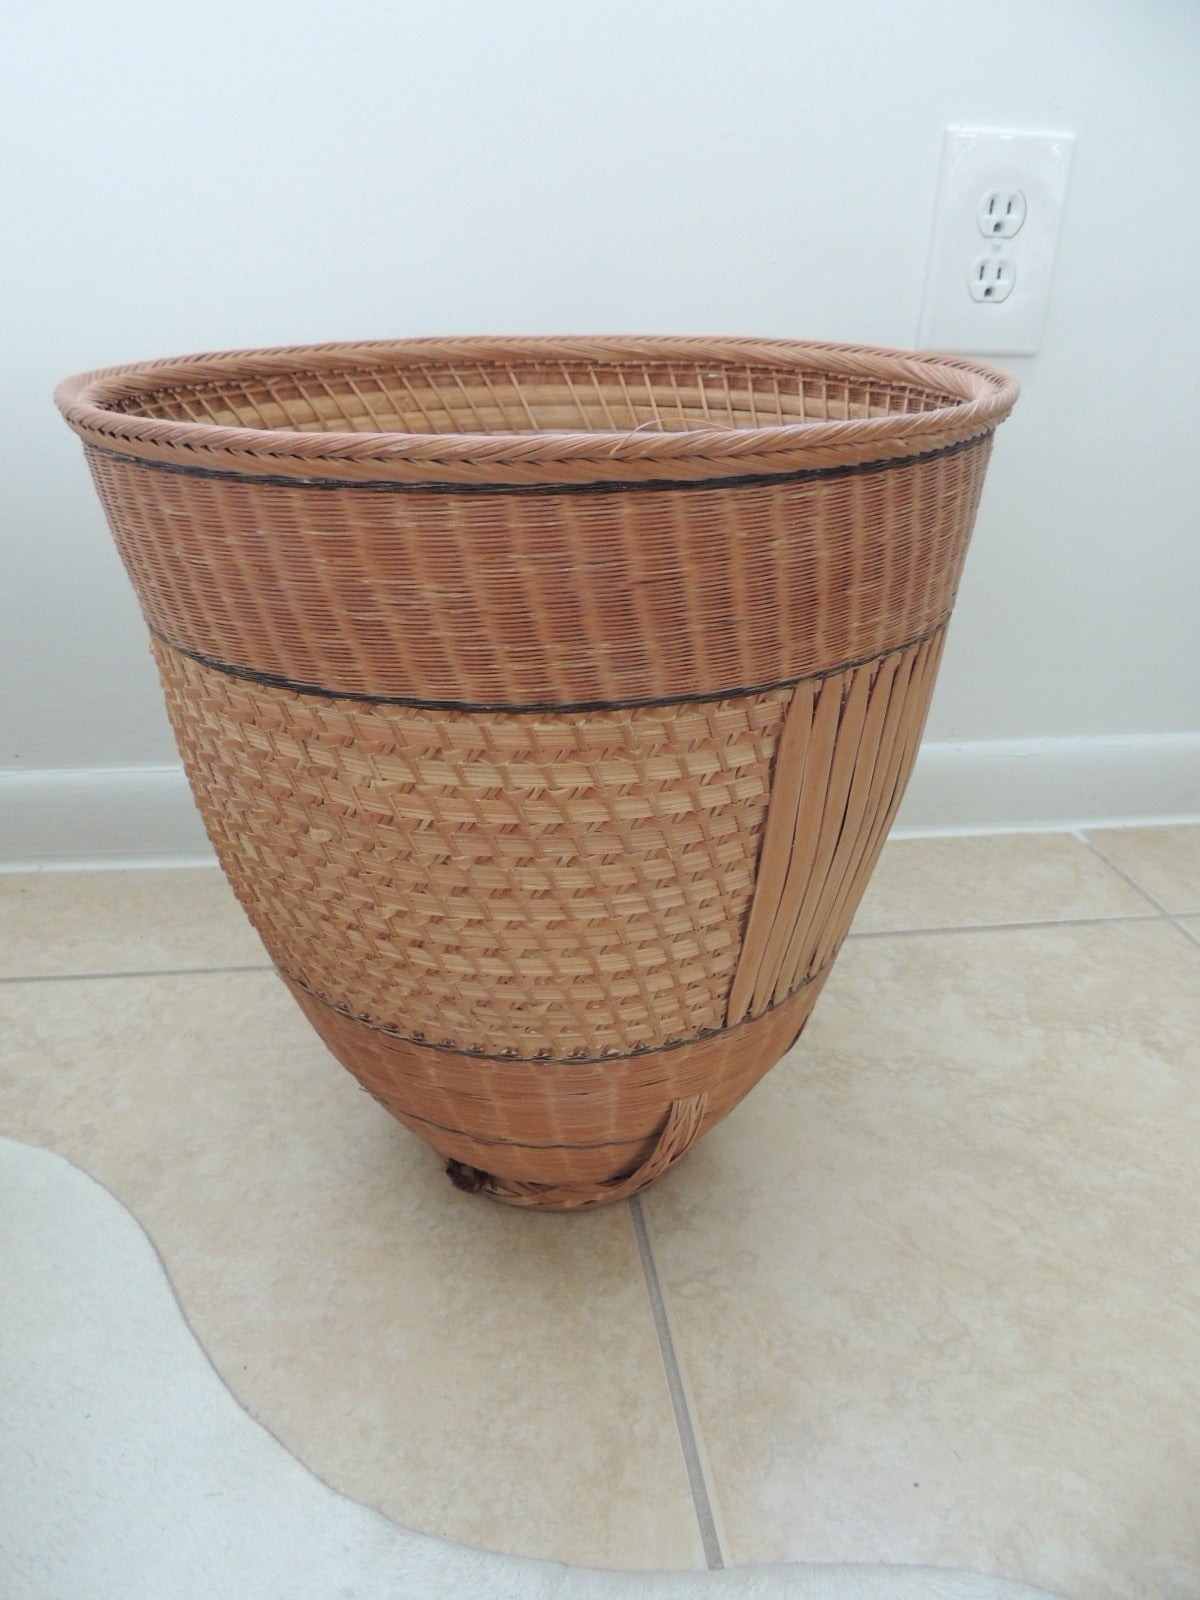 Vintage conical shape Indonesian basket, has rattan and sea grass weave into the design.